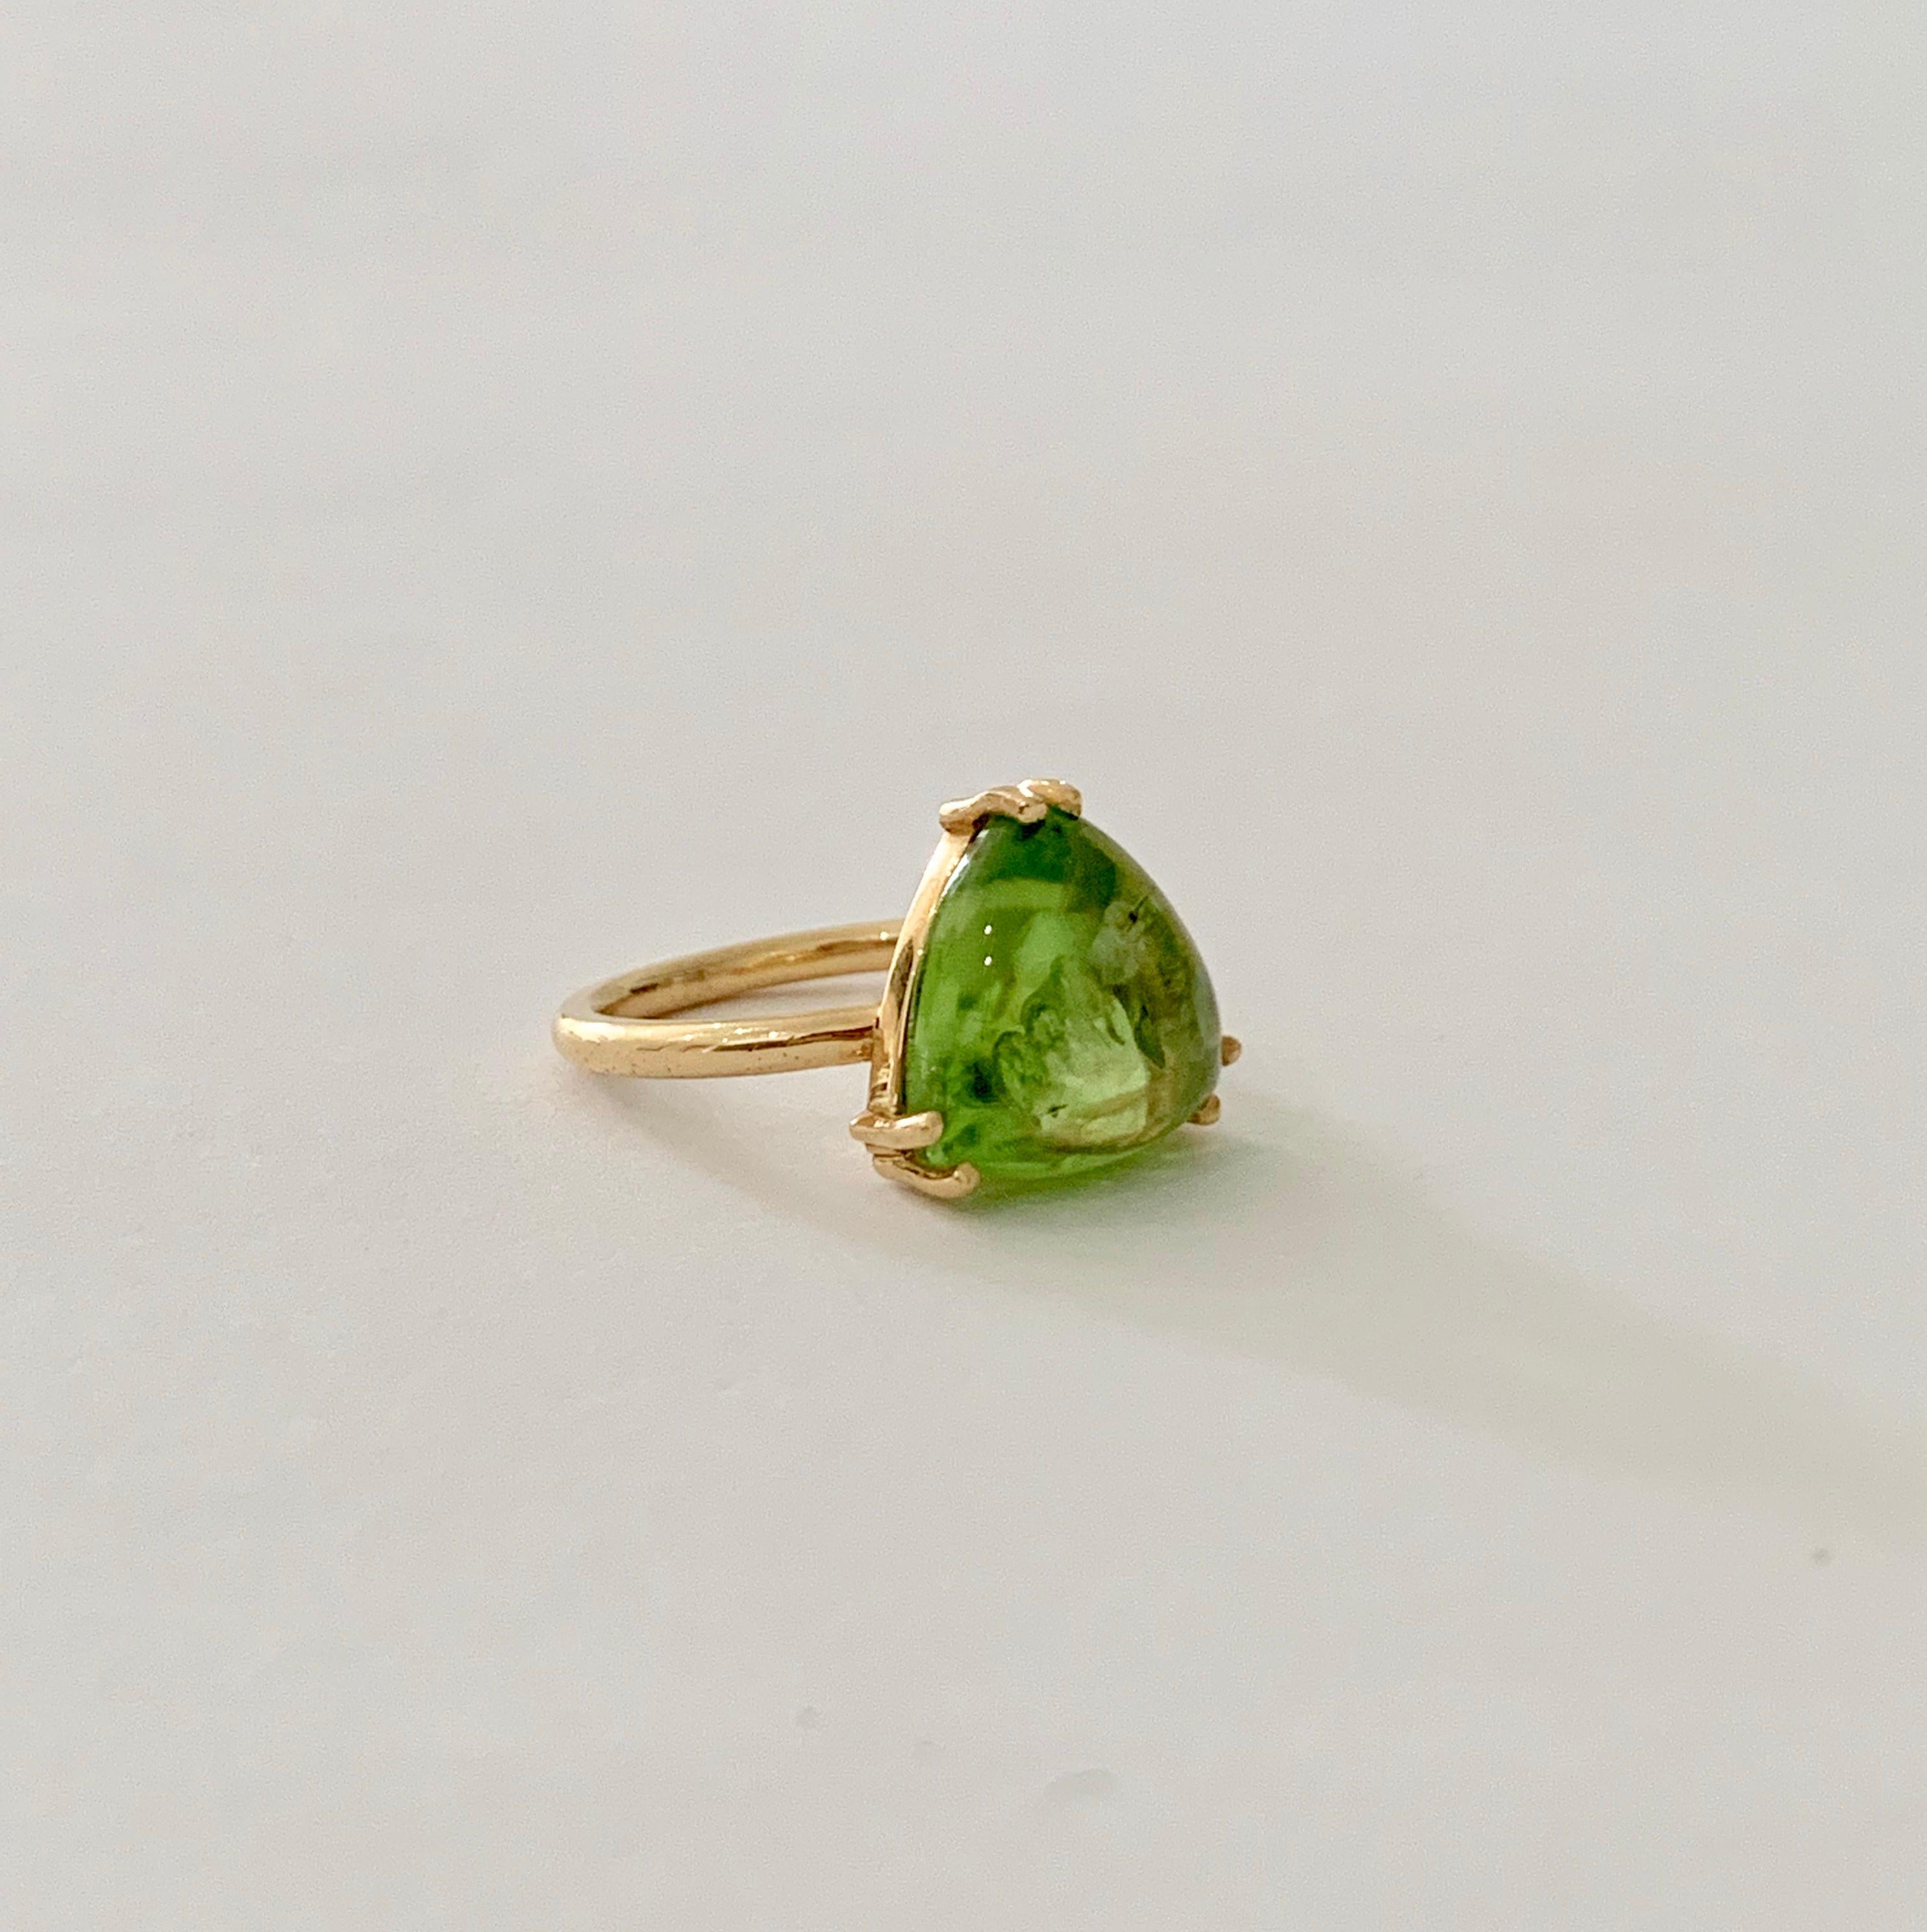 Bespoke 7.00 Carat Trillion Cut Cabochon Peridot Ring in 18 Carat Yellow Gold For Sale 2